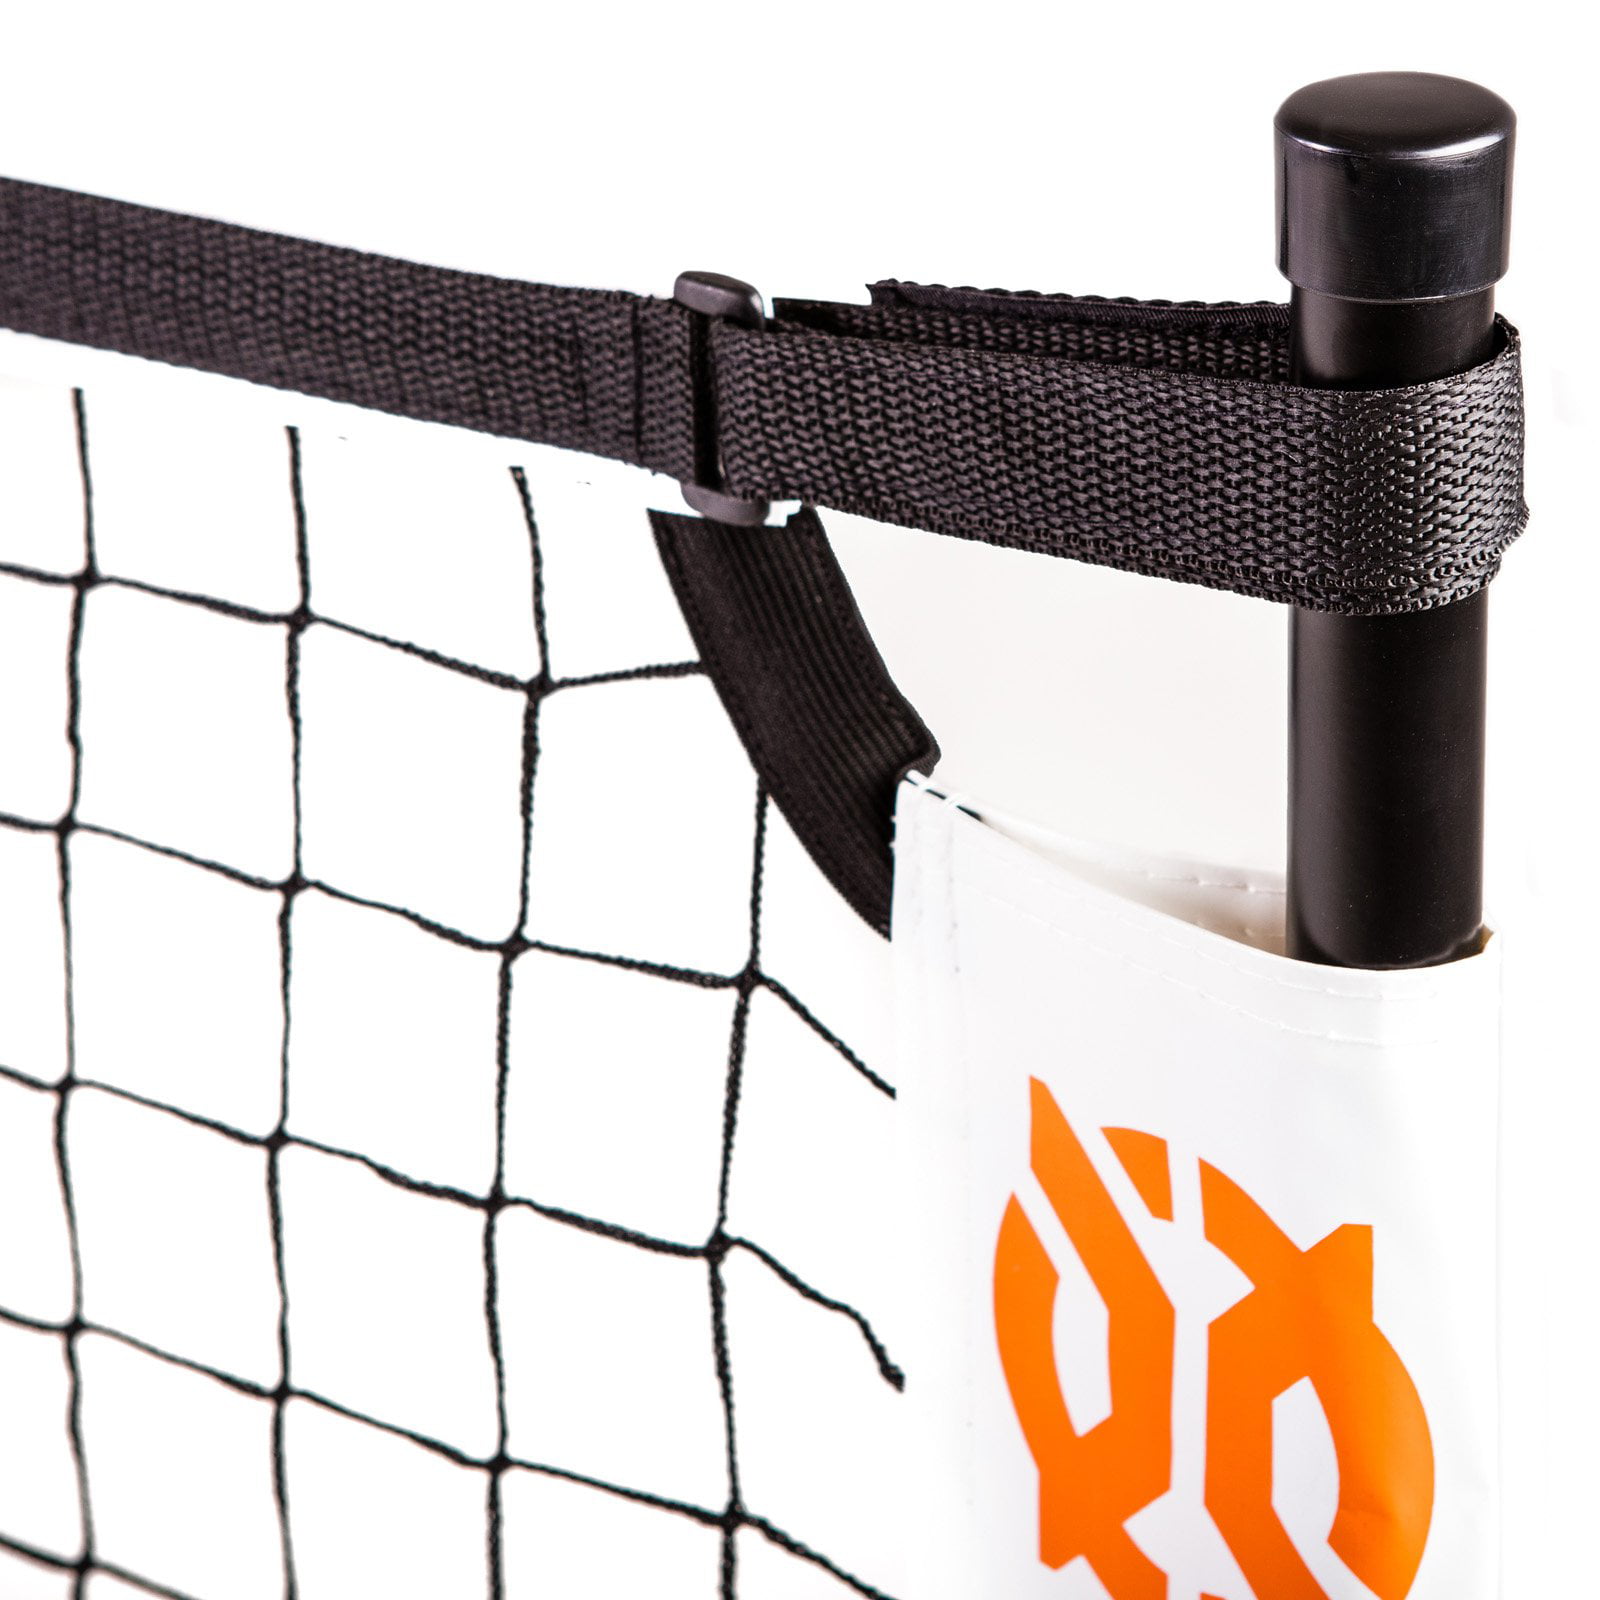 Suppliers Of All-weather Pickleball Paddle Net With Steel Ropes Pickleball Net Only Are Available Custom Made Full Size Polyprop Buy Pickleball Paddle Net,Pickleball Net Only,Professional Pickleball Nets Product On lupon.gov.ph